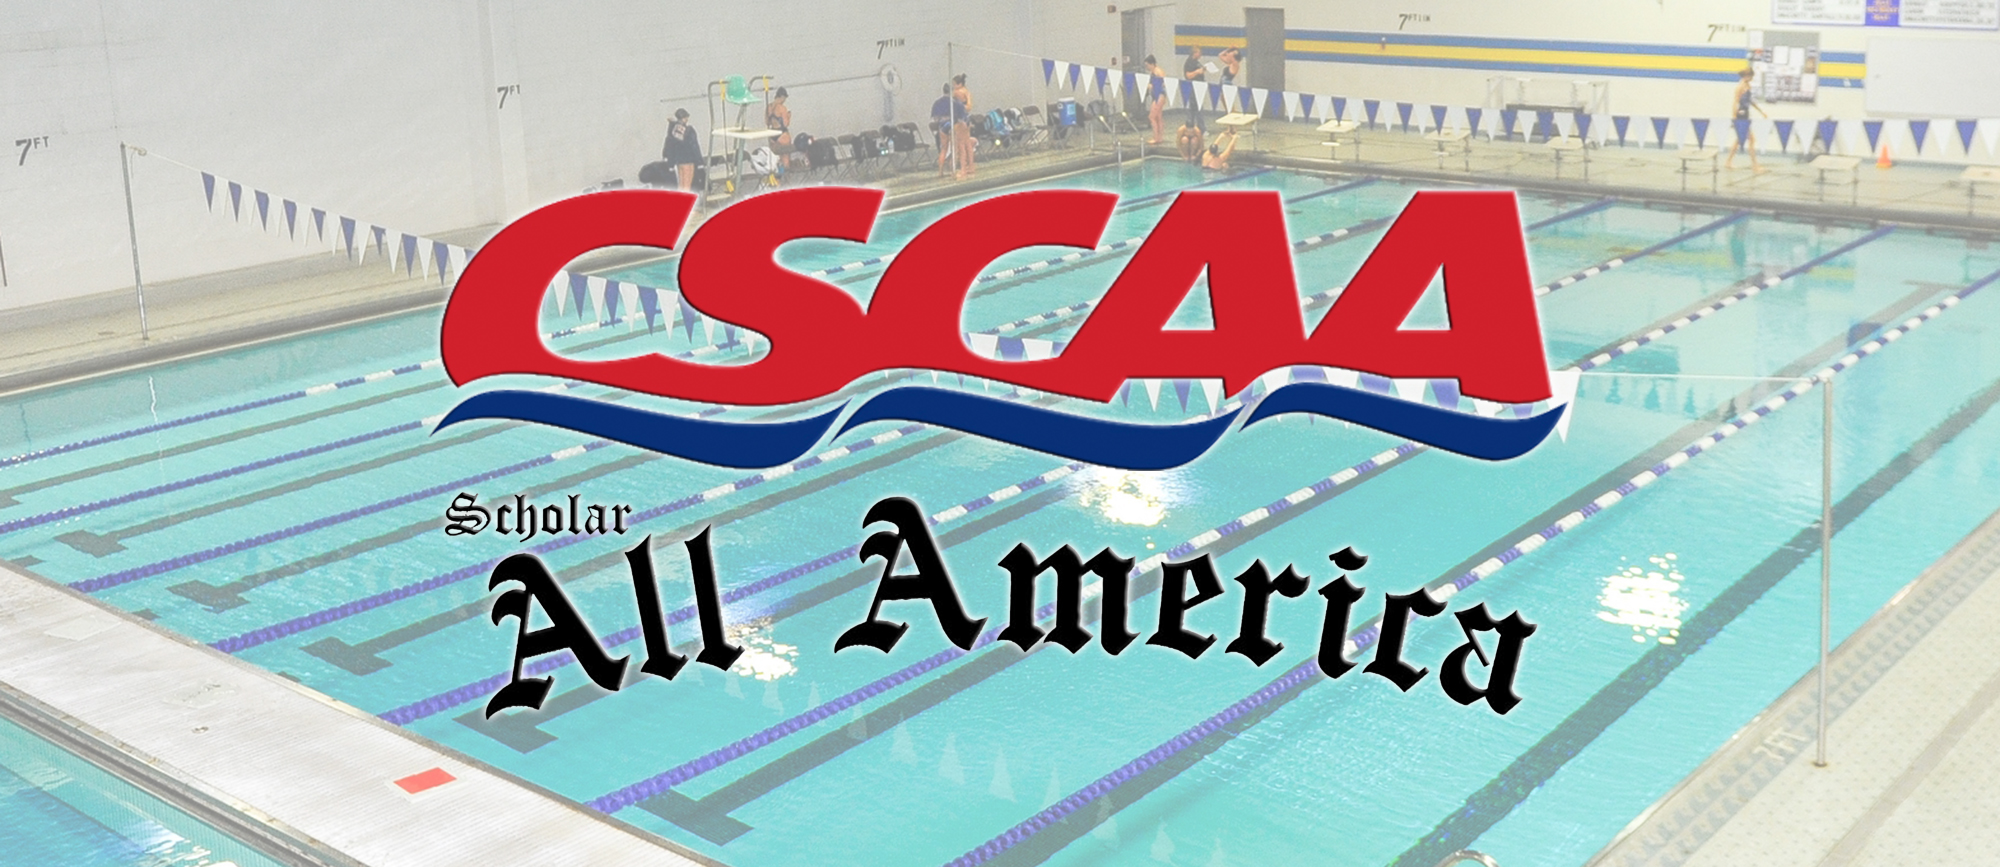 Western New England Earns CSCAA Spring Scholar All-America Honors